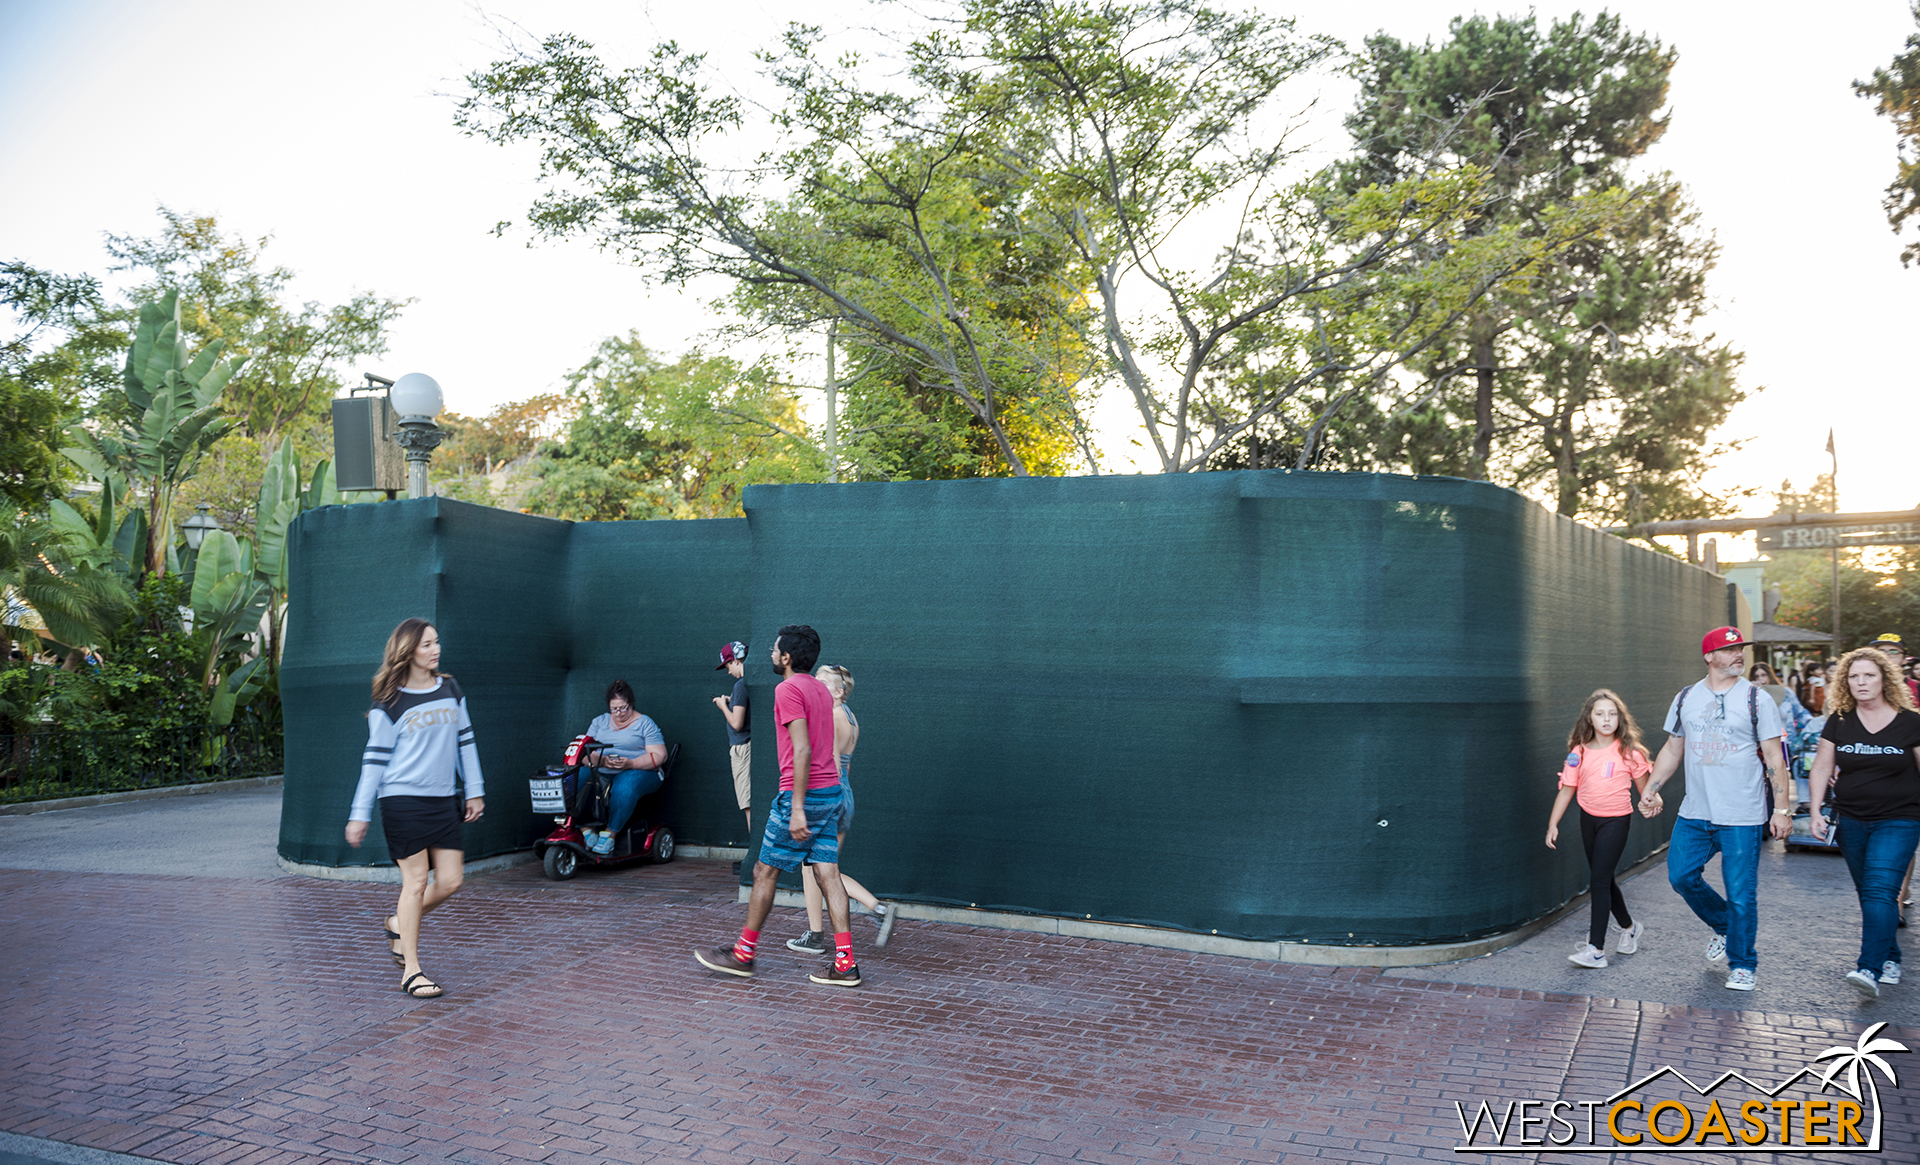  Work fencing is up around the pond between the Adventureland and Frontierland entrances. 